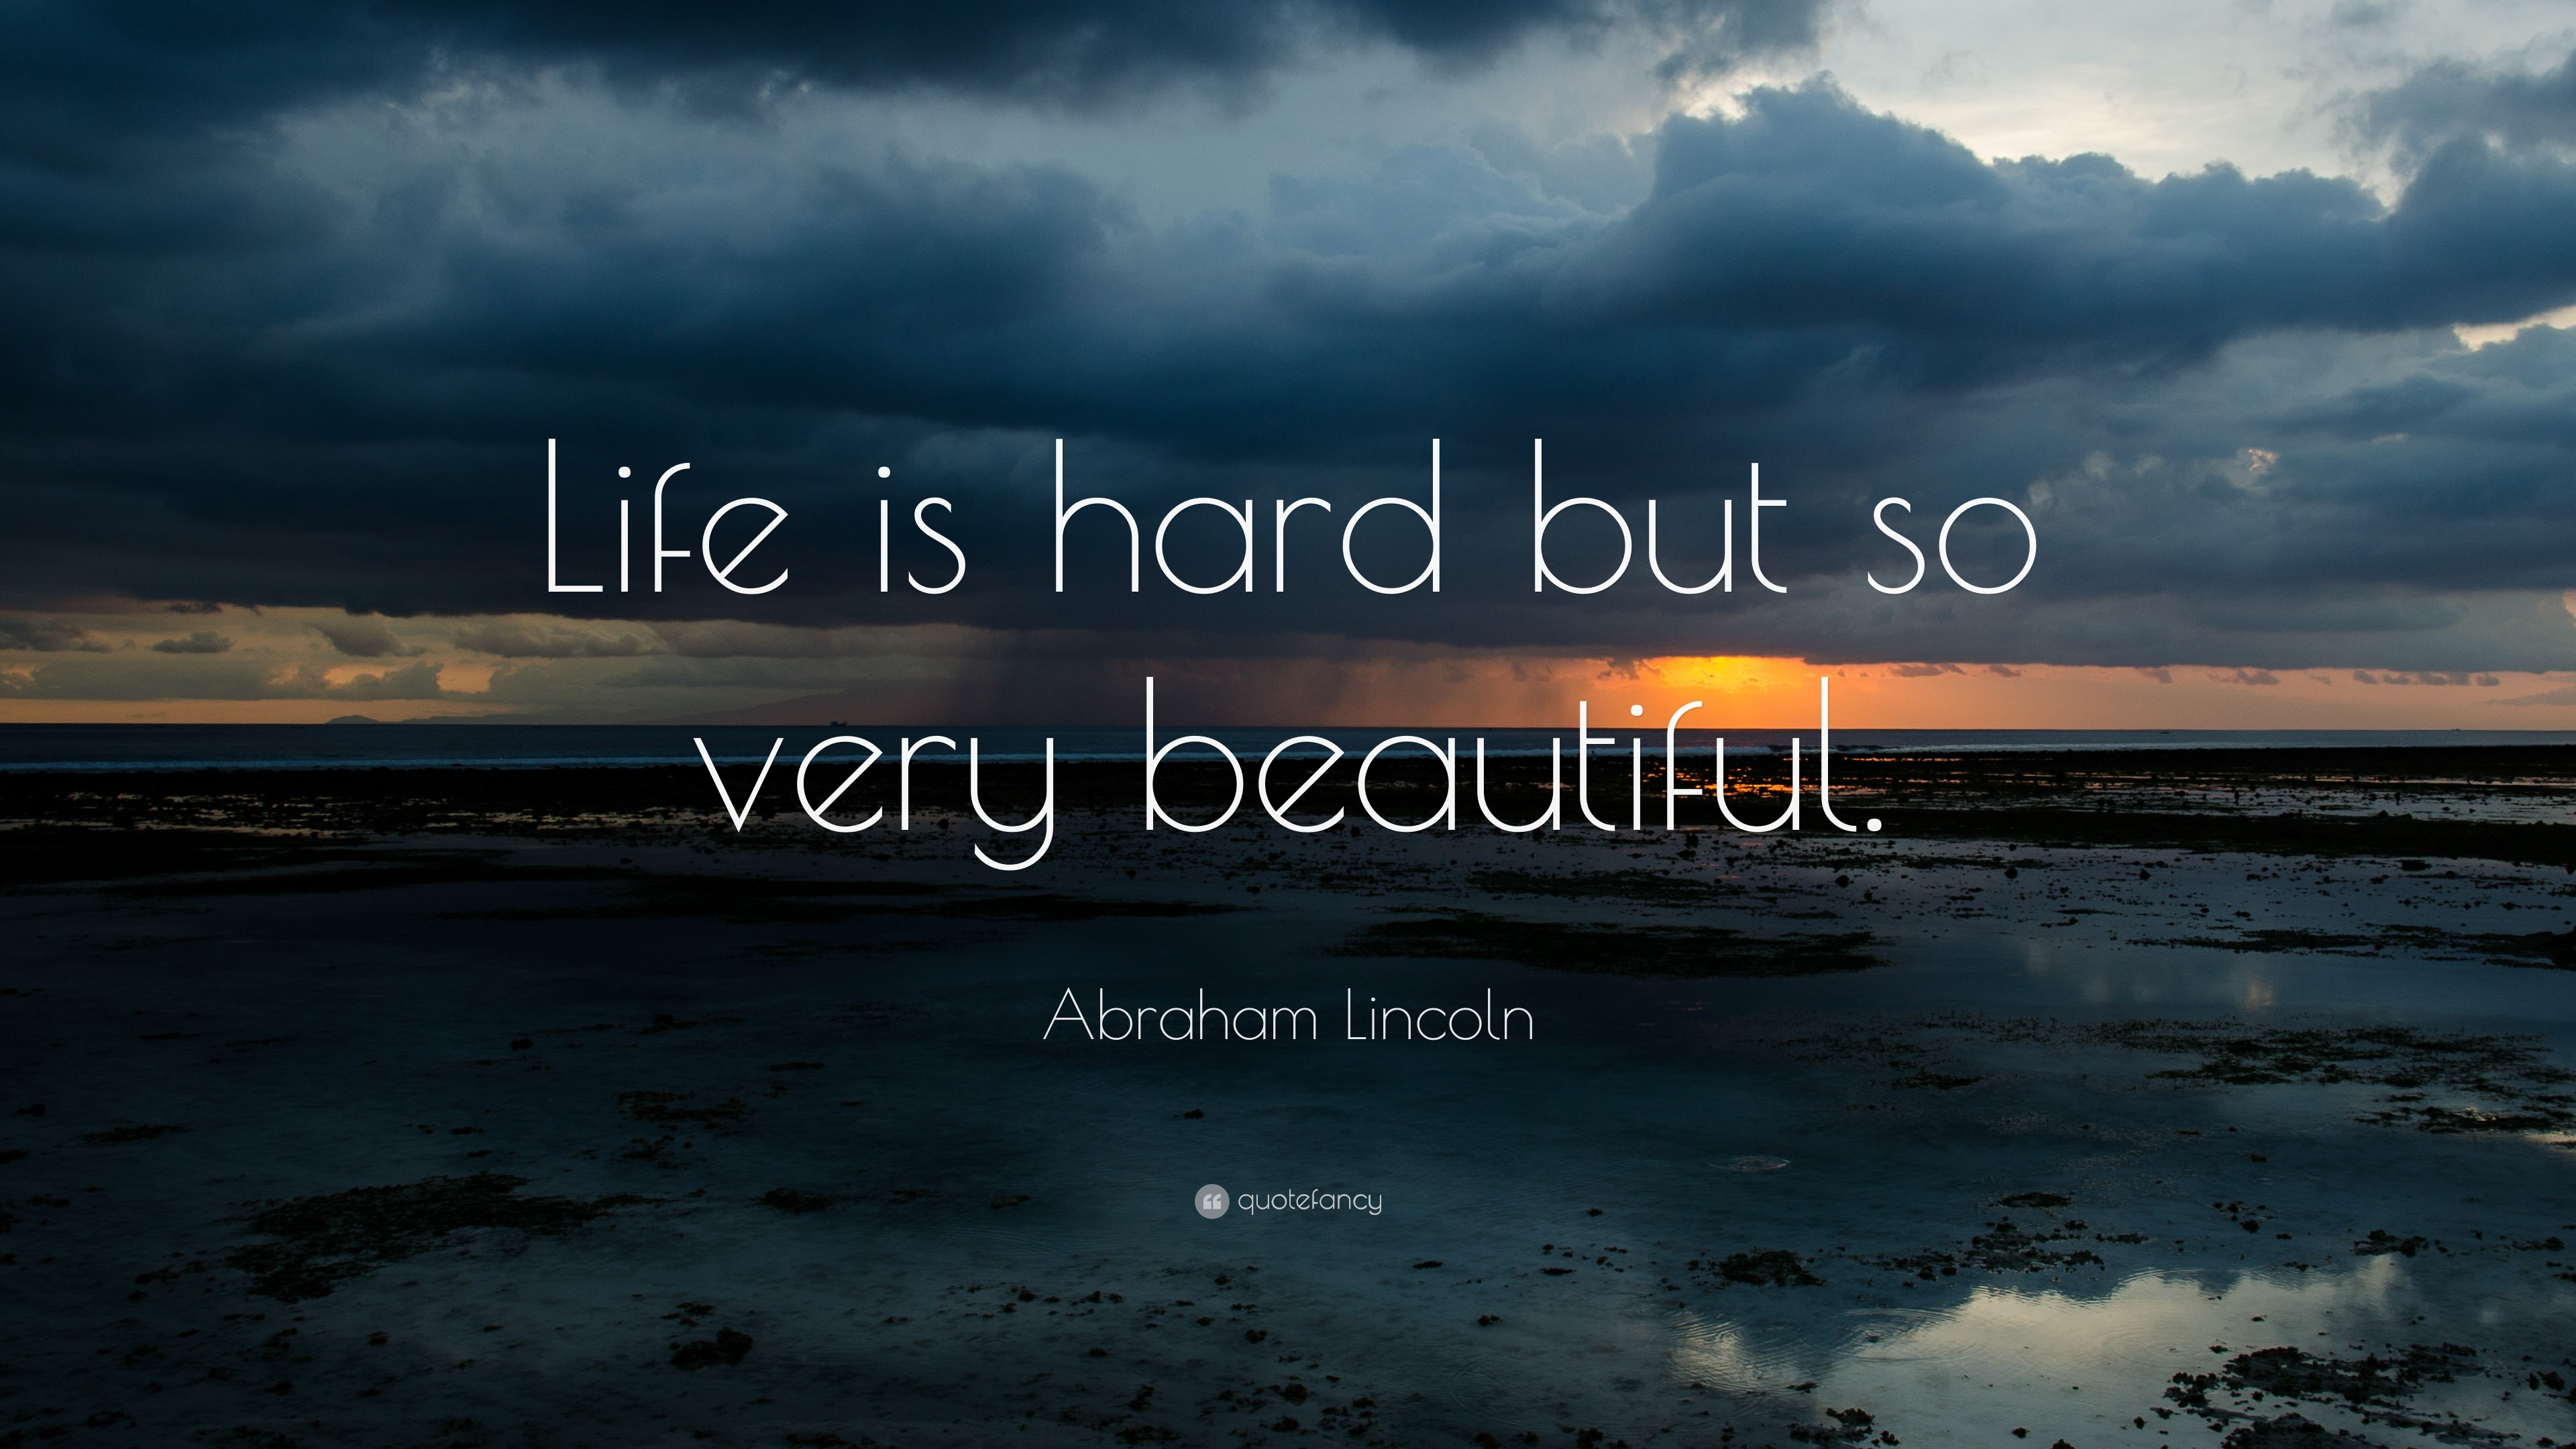 3840x2160 Abraham Lincoln Quote: “Life is hard but so very beautiful.”